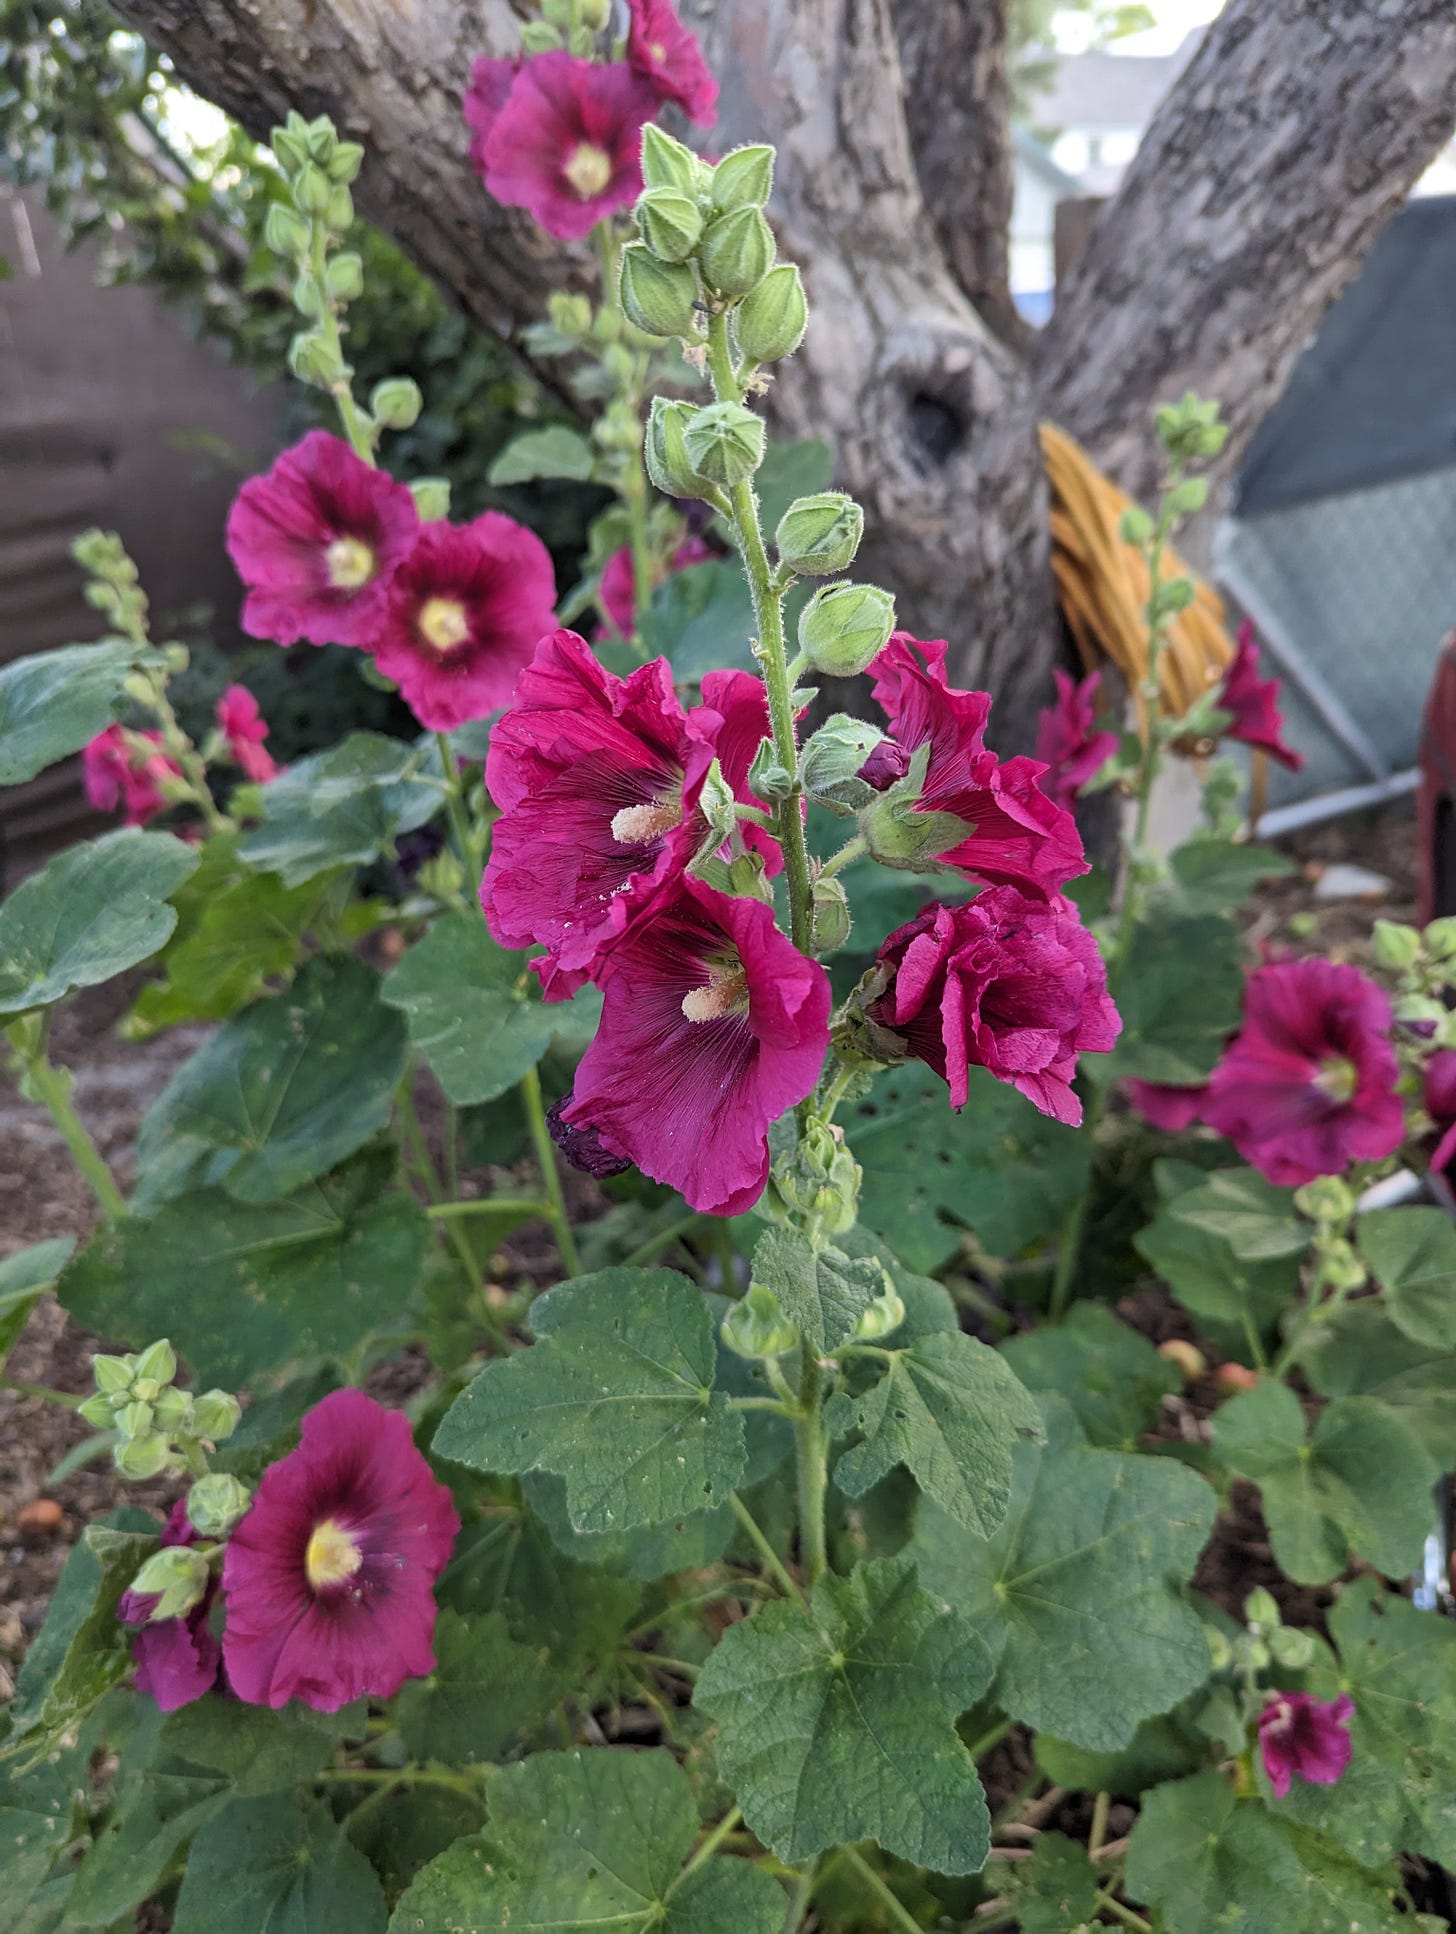 Cluster of dark pink hollyhocks in front of an apple tree trunk.